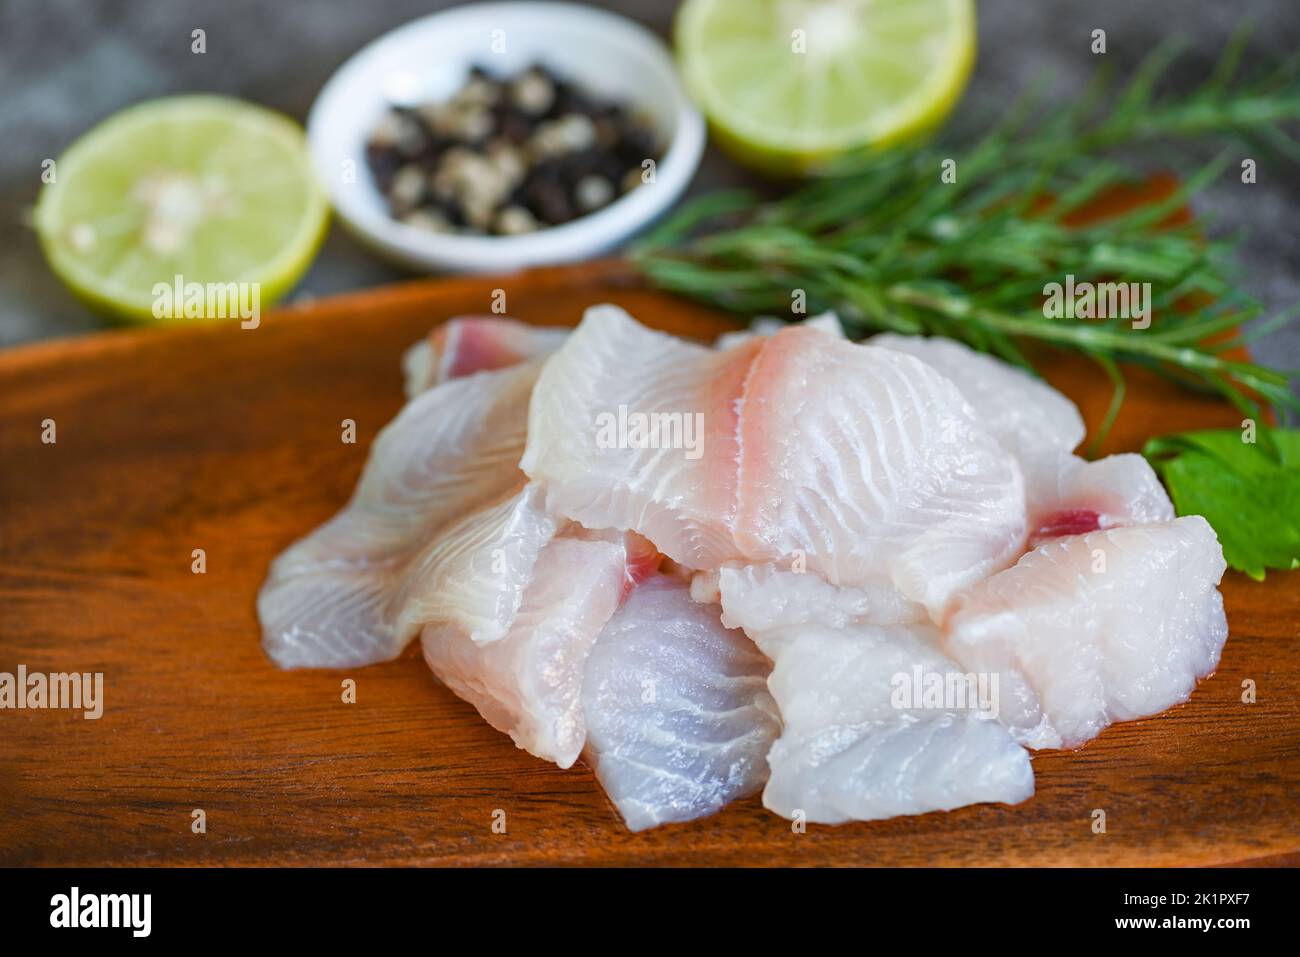 fresh raw pangasius fish fillet with, meat dolly fish tilapia striped catfish, fish fillet on wooden board with ingredients celery for cooking Stock Photo